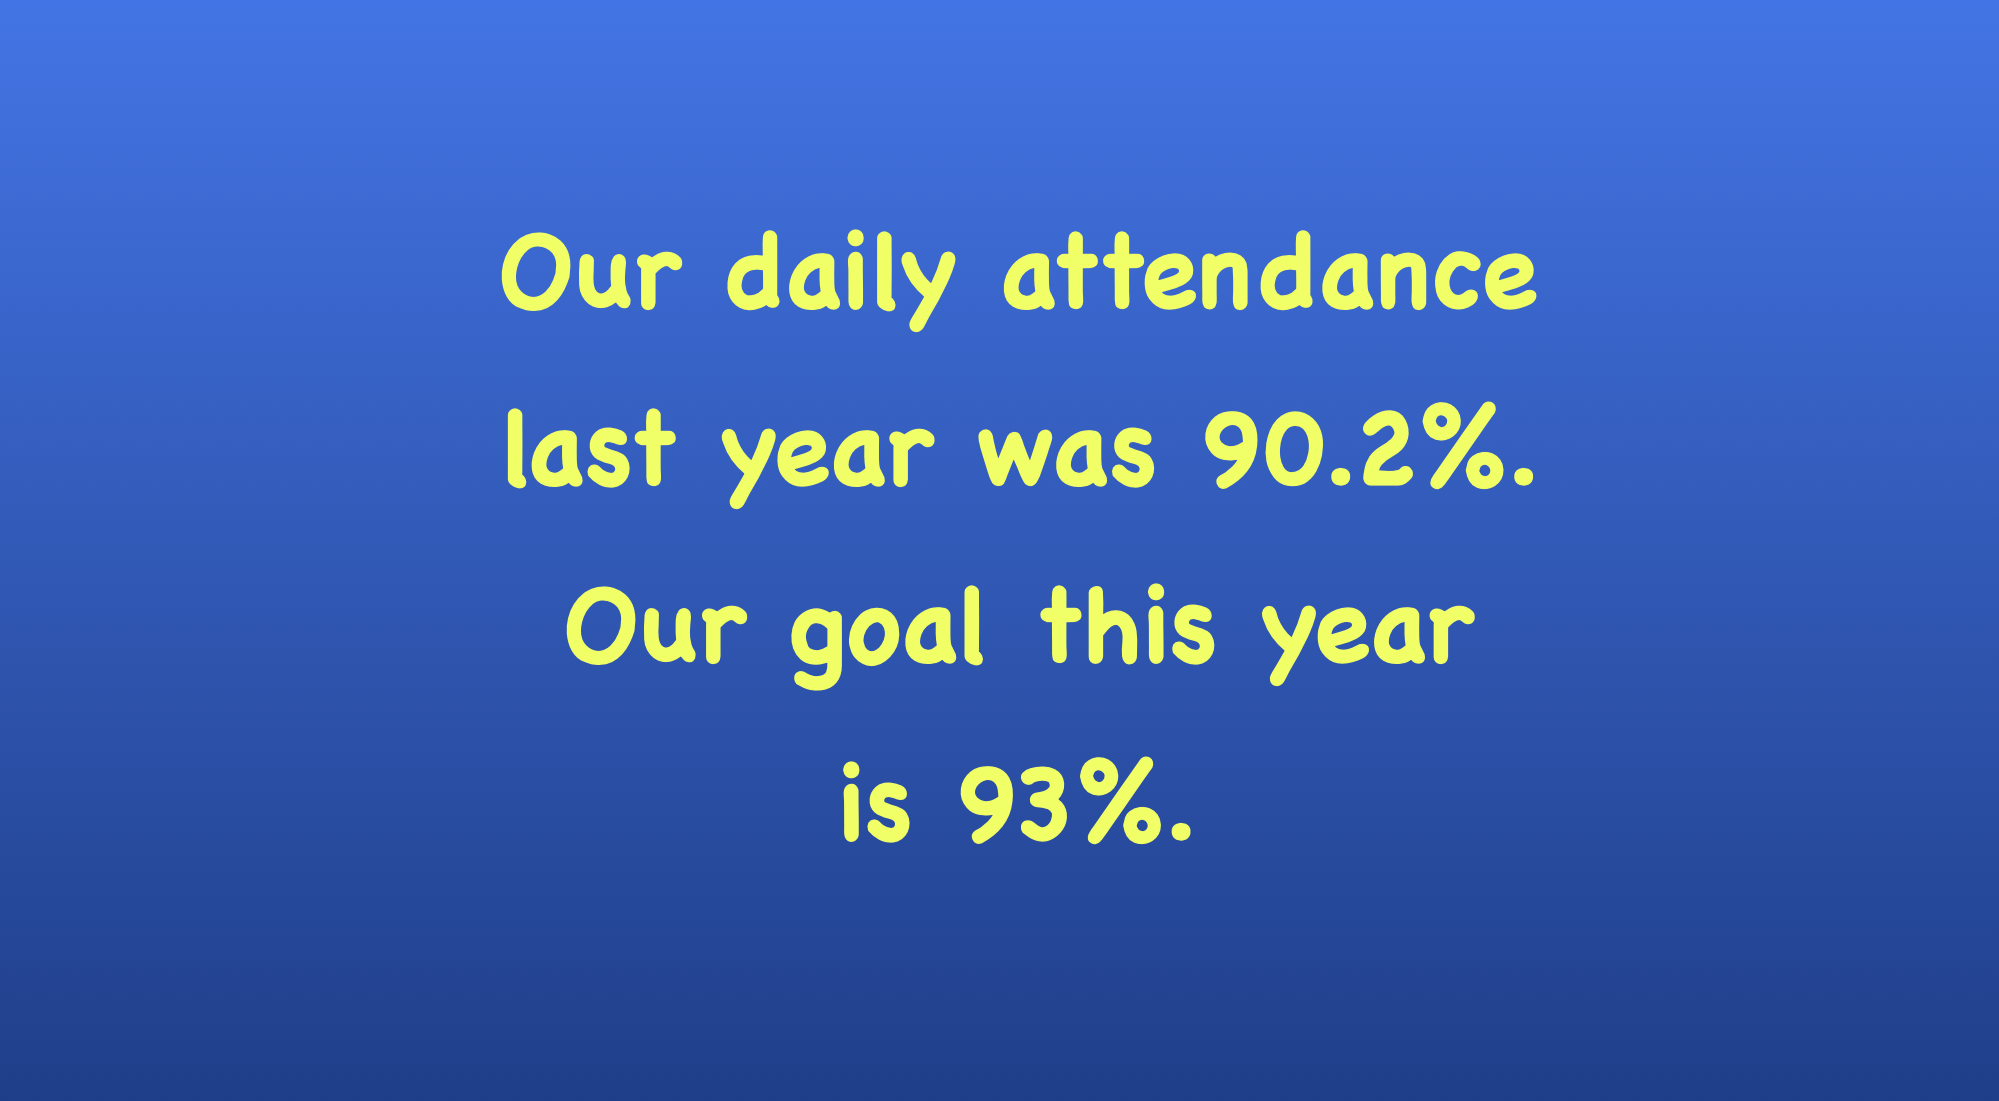 Last year, we averaged 90.6% daily attendance. Our goal this year is to average 93% daily attendance.